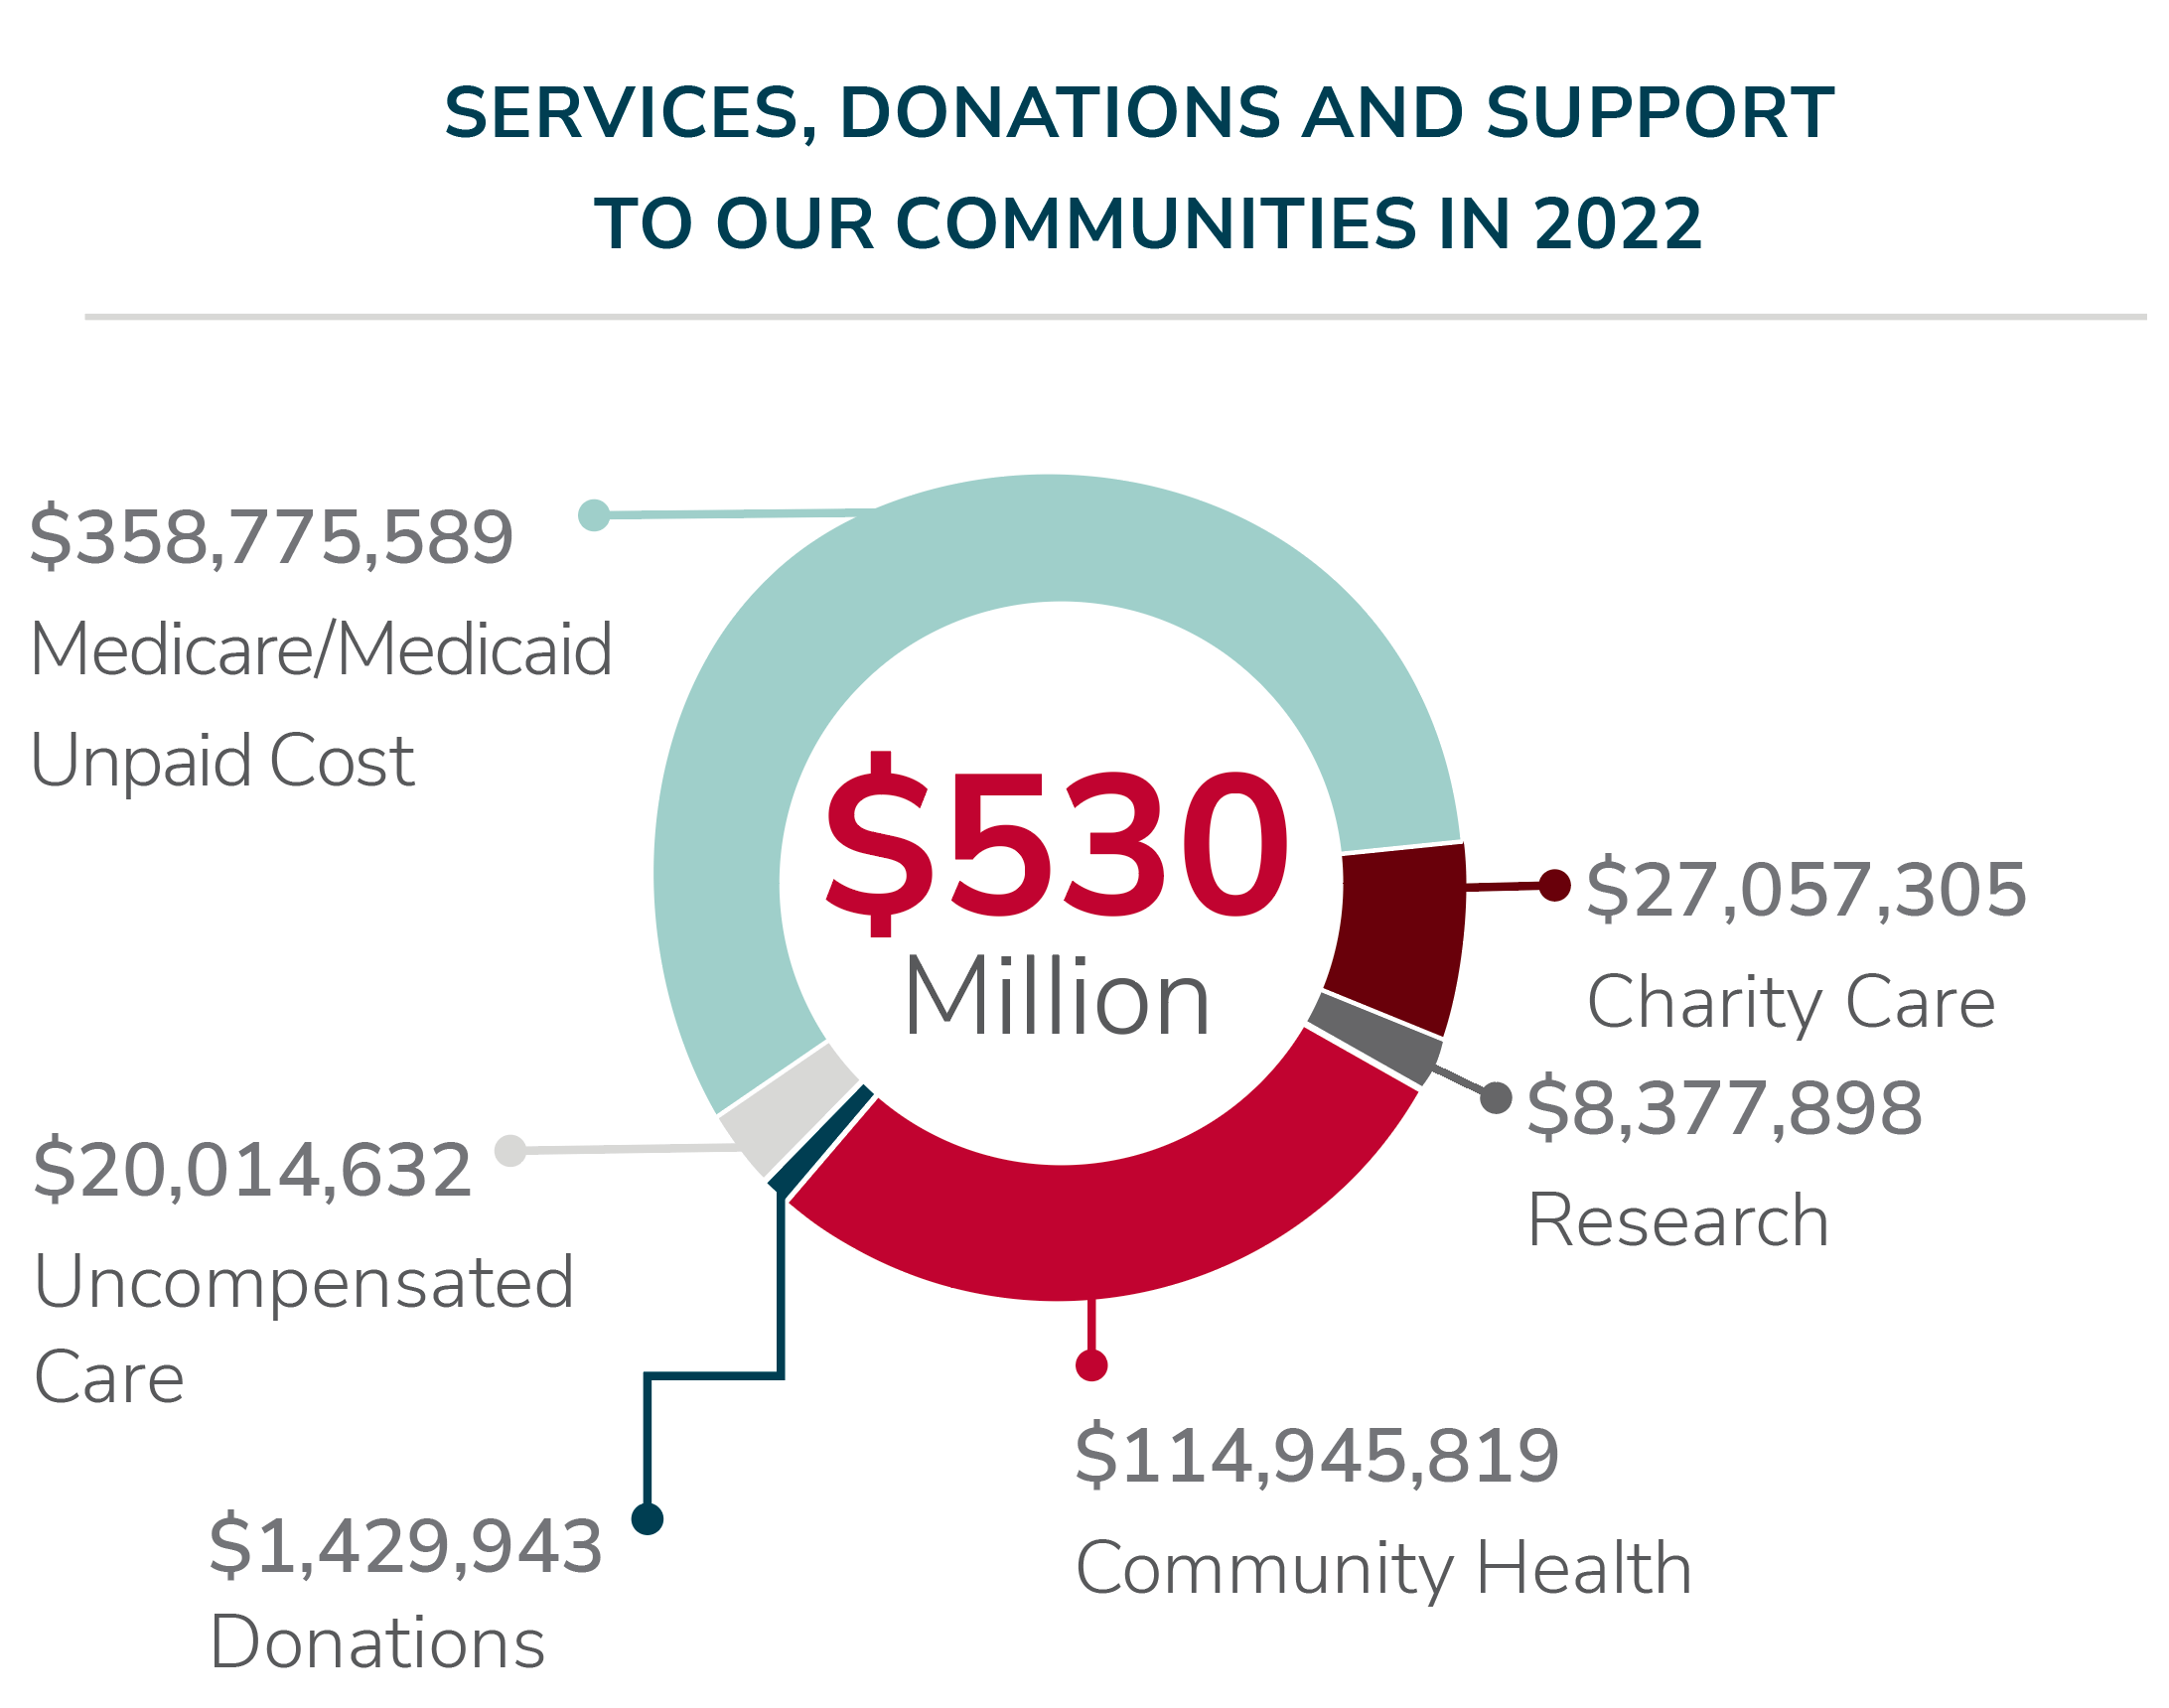 Services, donations, and support to our communities in 2022